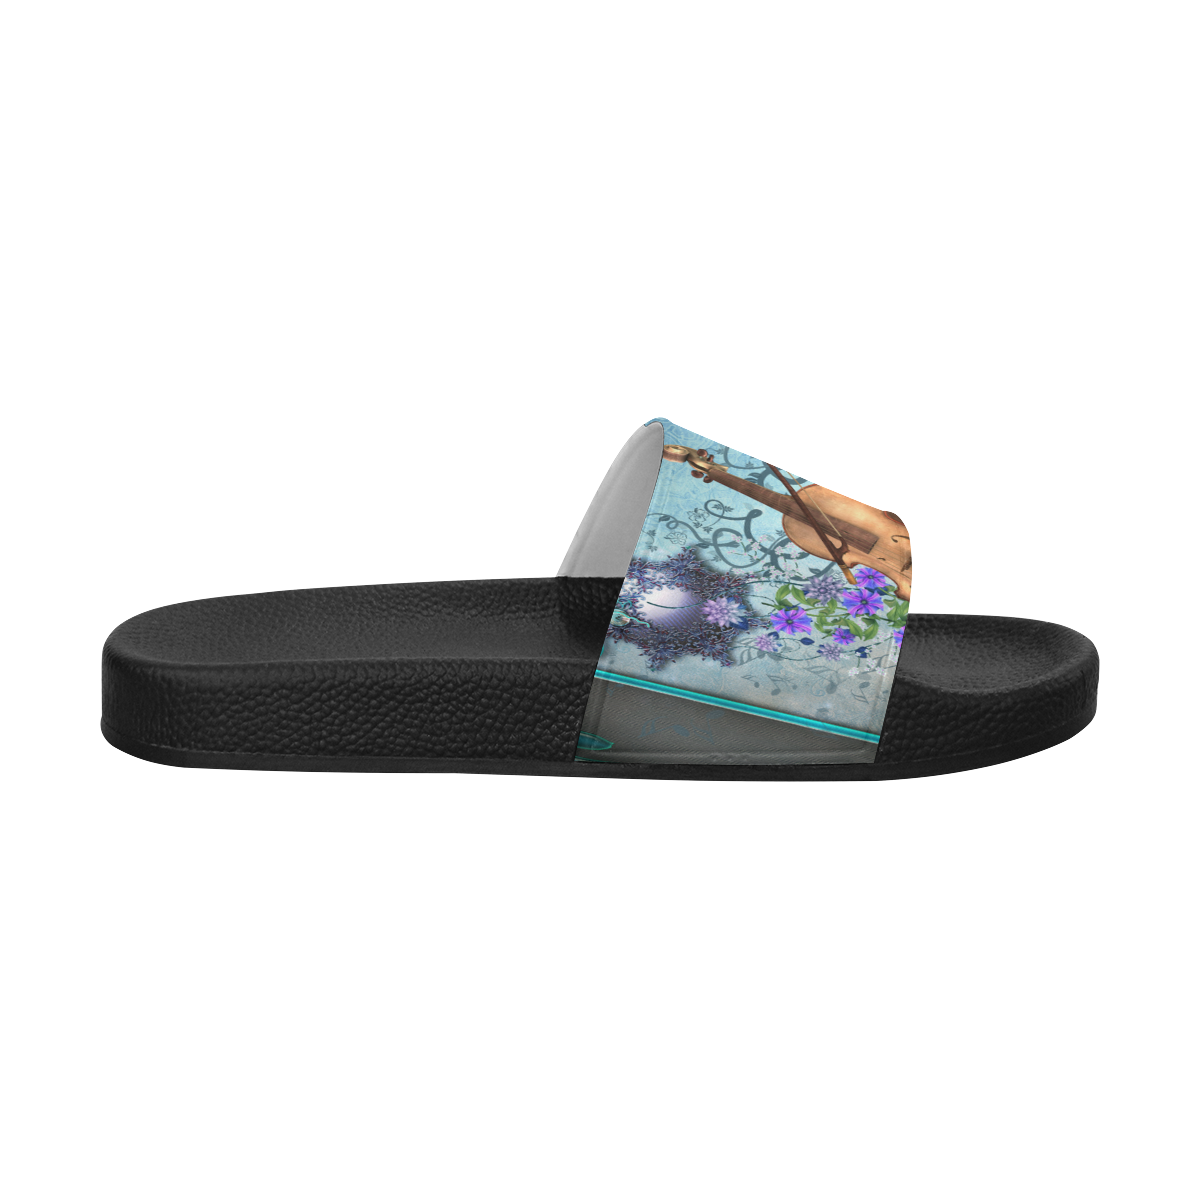 Violin with violin bow and flowers Women's Slide Sandals (Model 057)